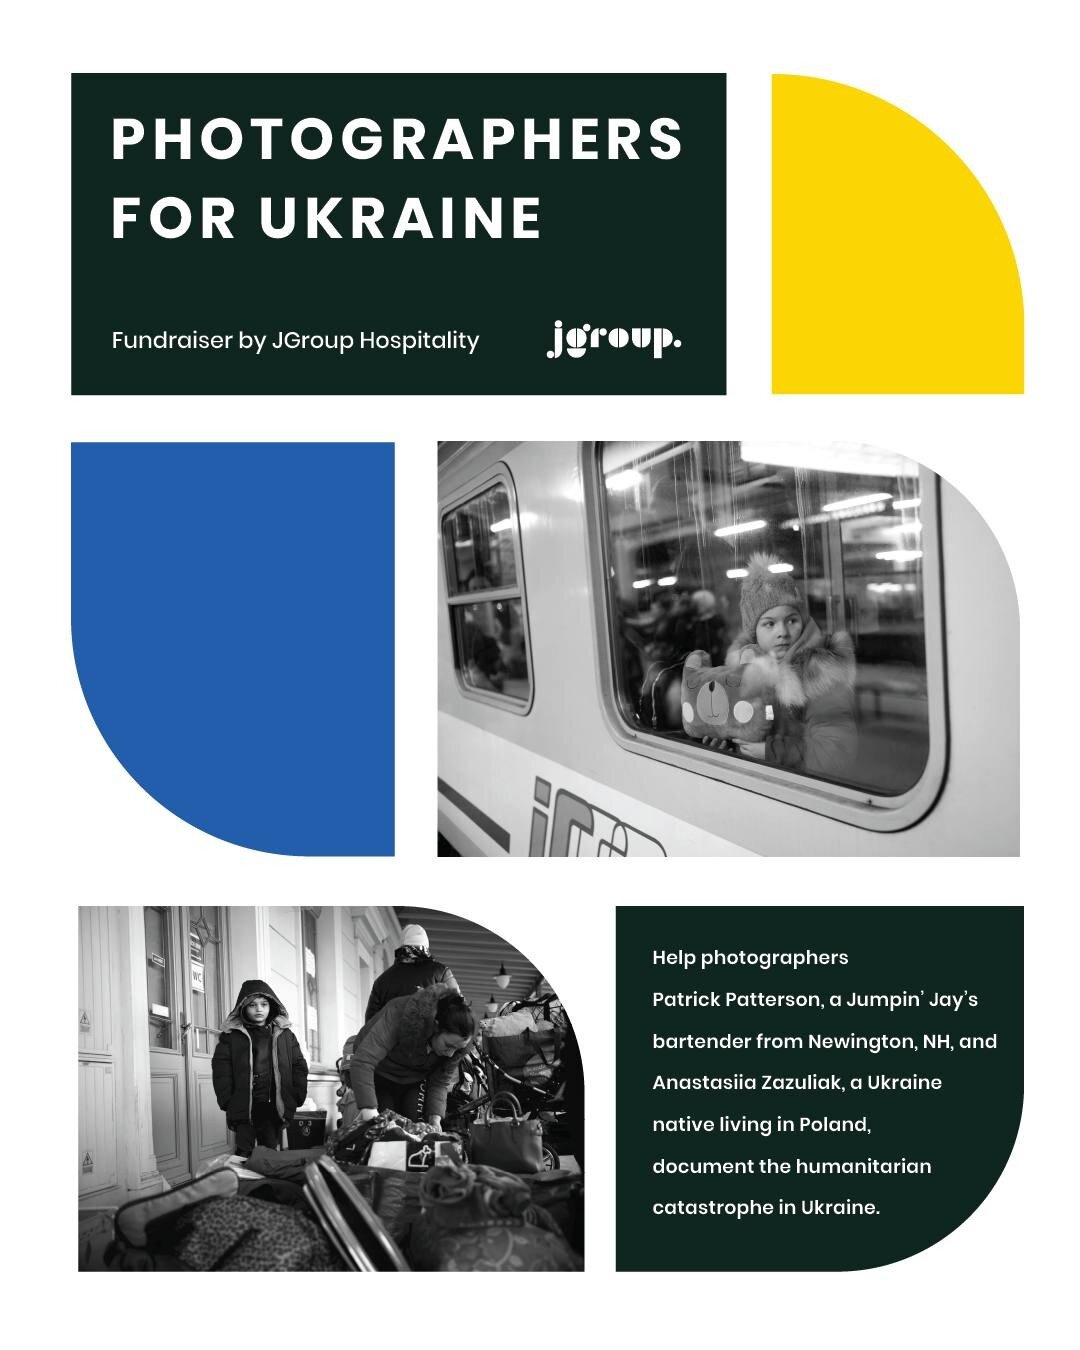 Help support Patrick Patterson, a local photographer and @jumpinjays bartender, and Anastasiia Zazuliak, a Ukrainian photographer living in Poland, document the humanitarian catastrophe in Ukraine.

The arts continue to be an essential tool in tellin